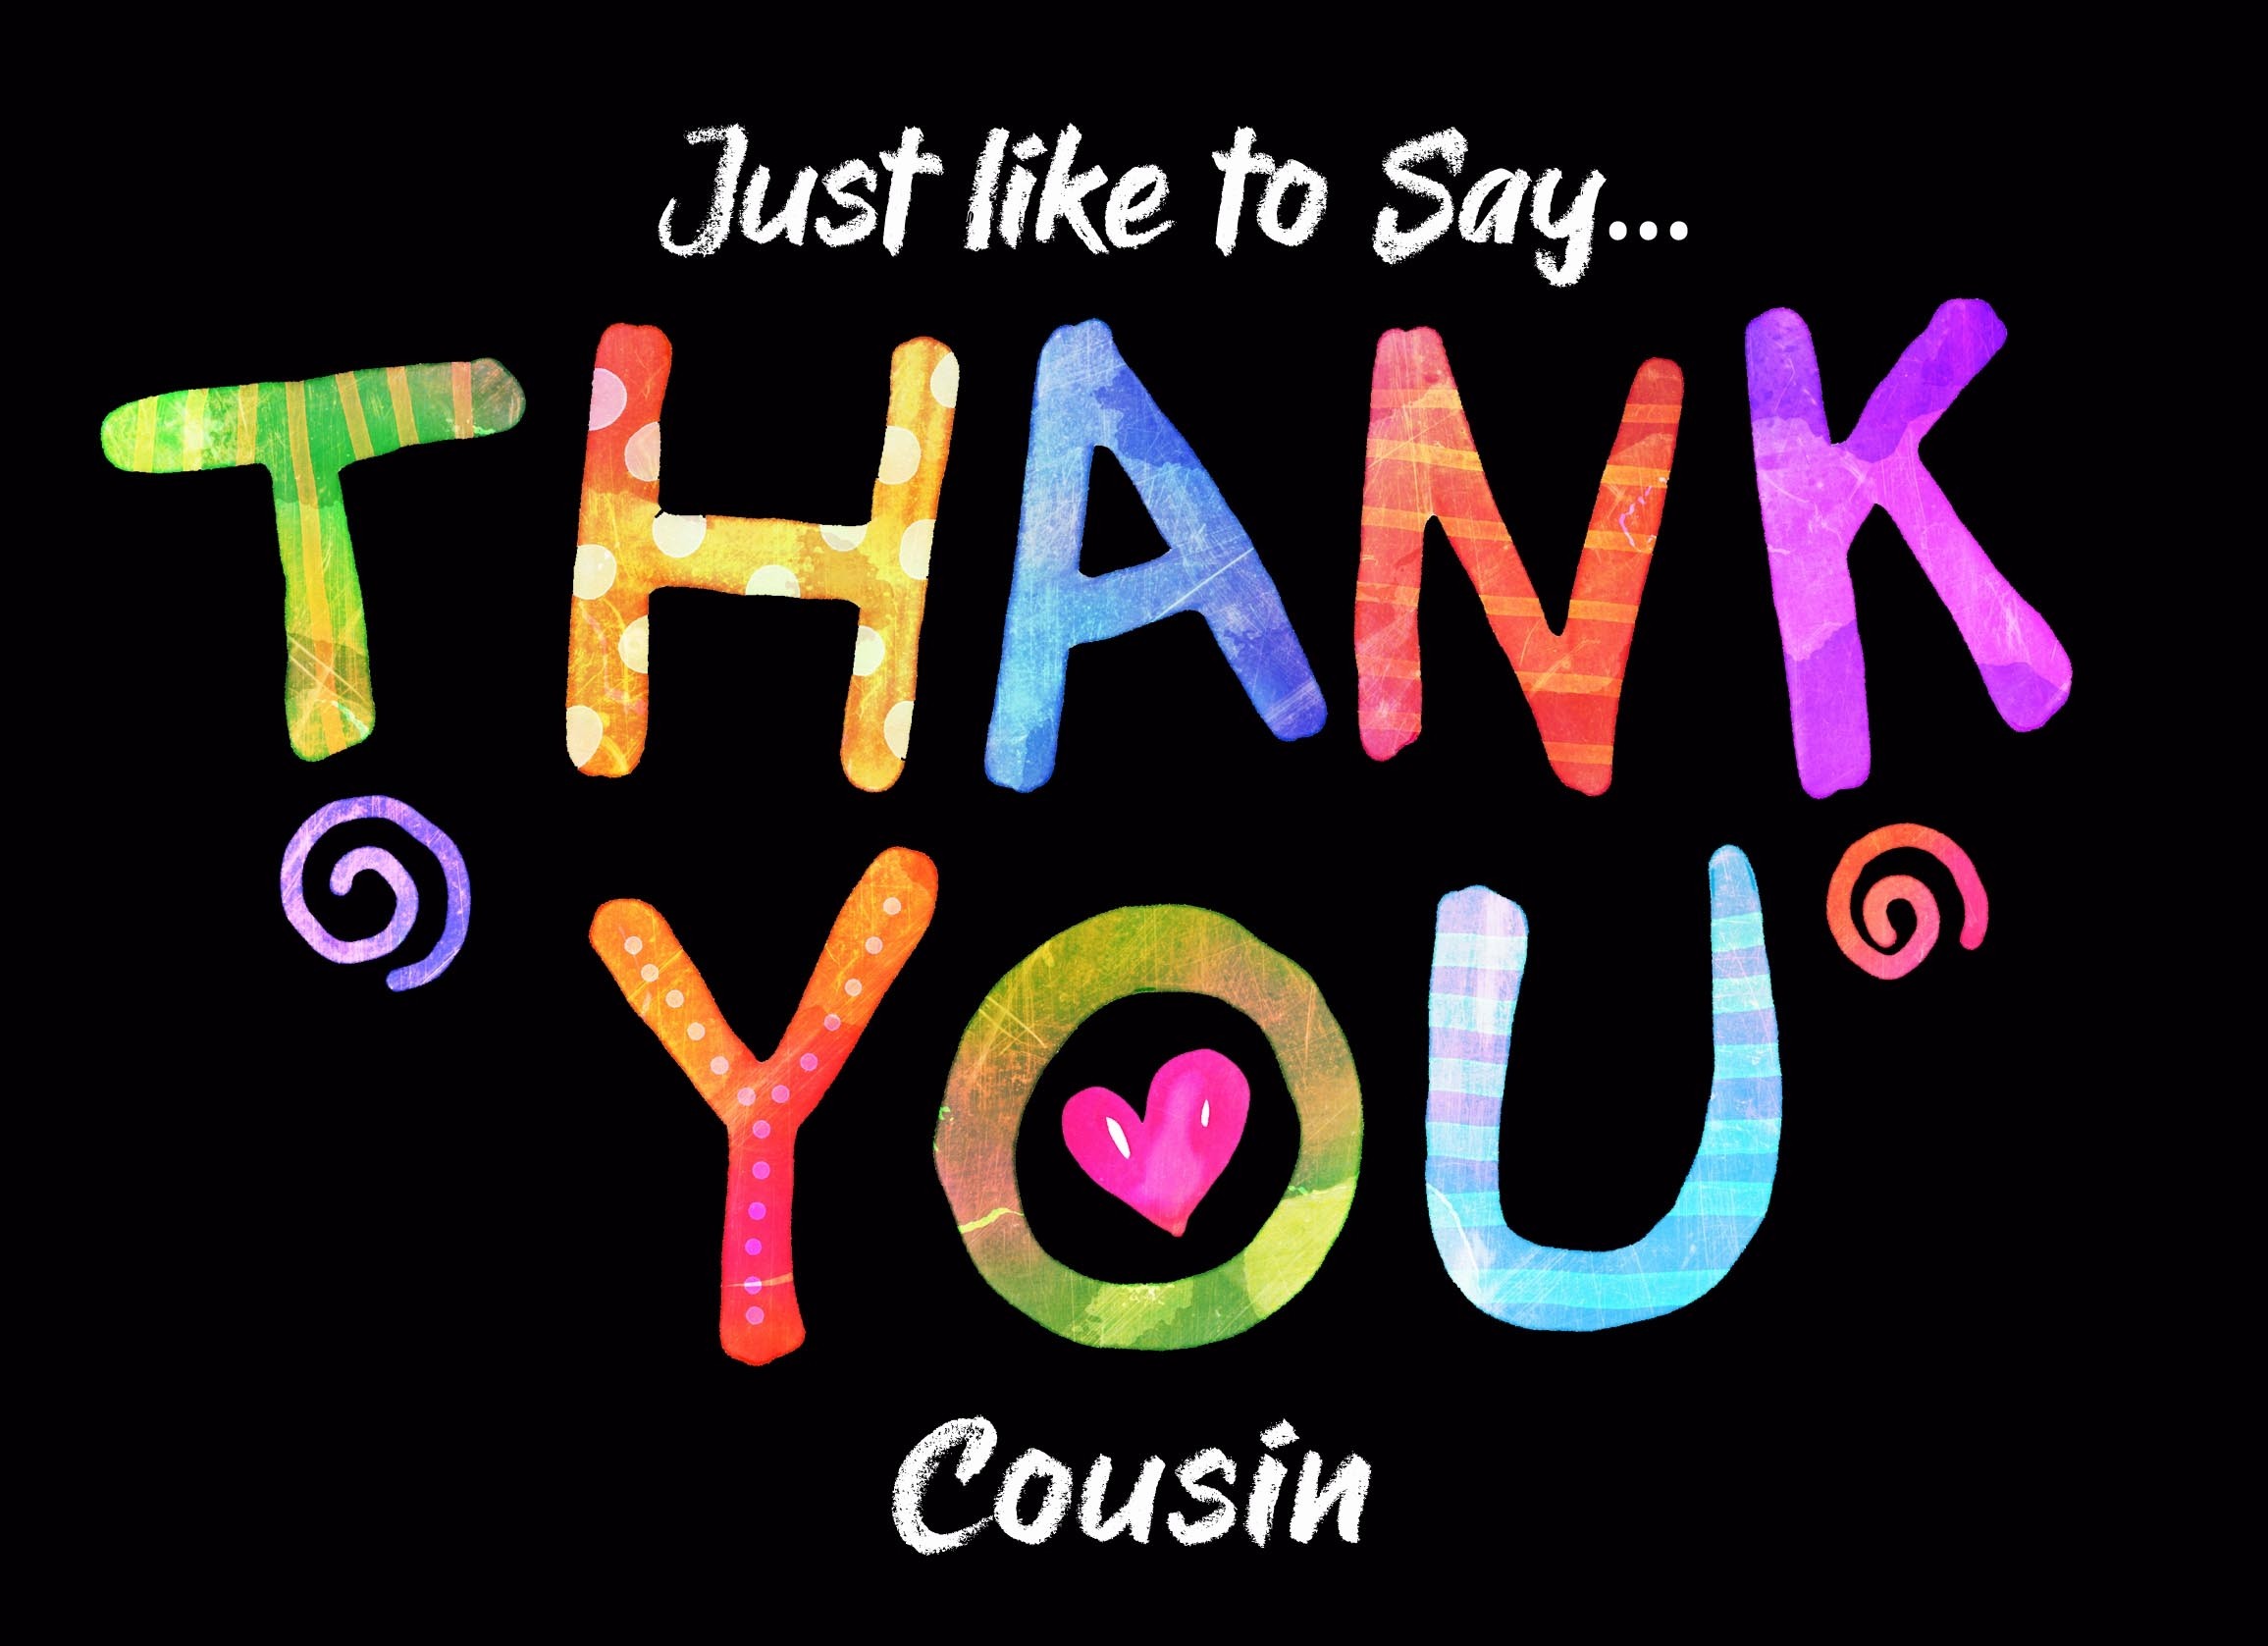 Thank You 'Cousin' Greeting Card